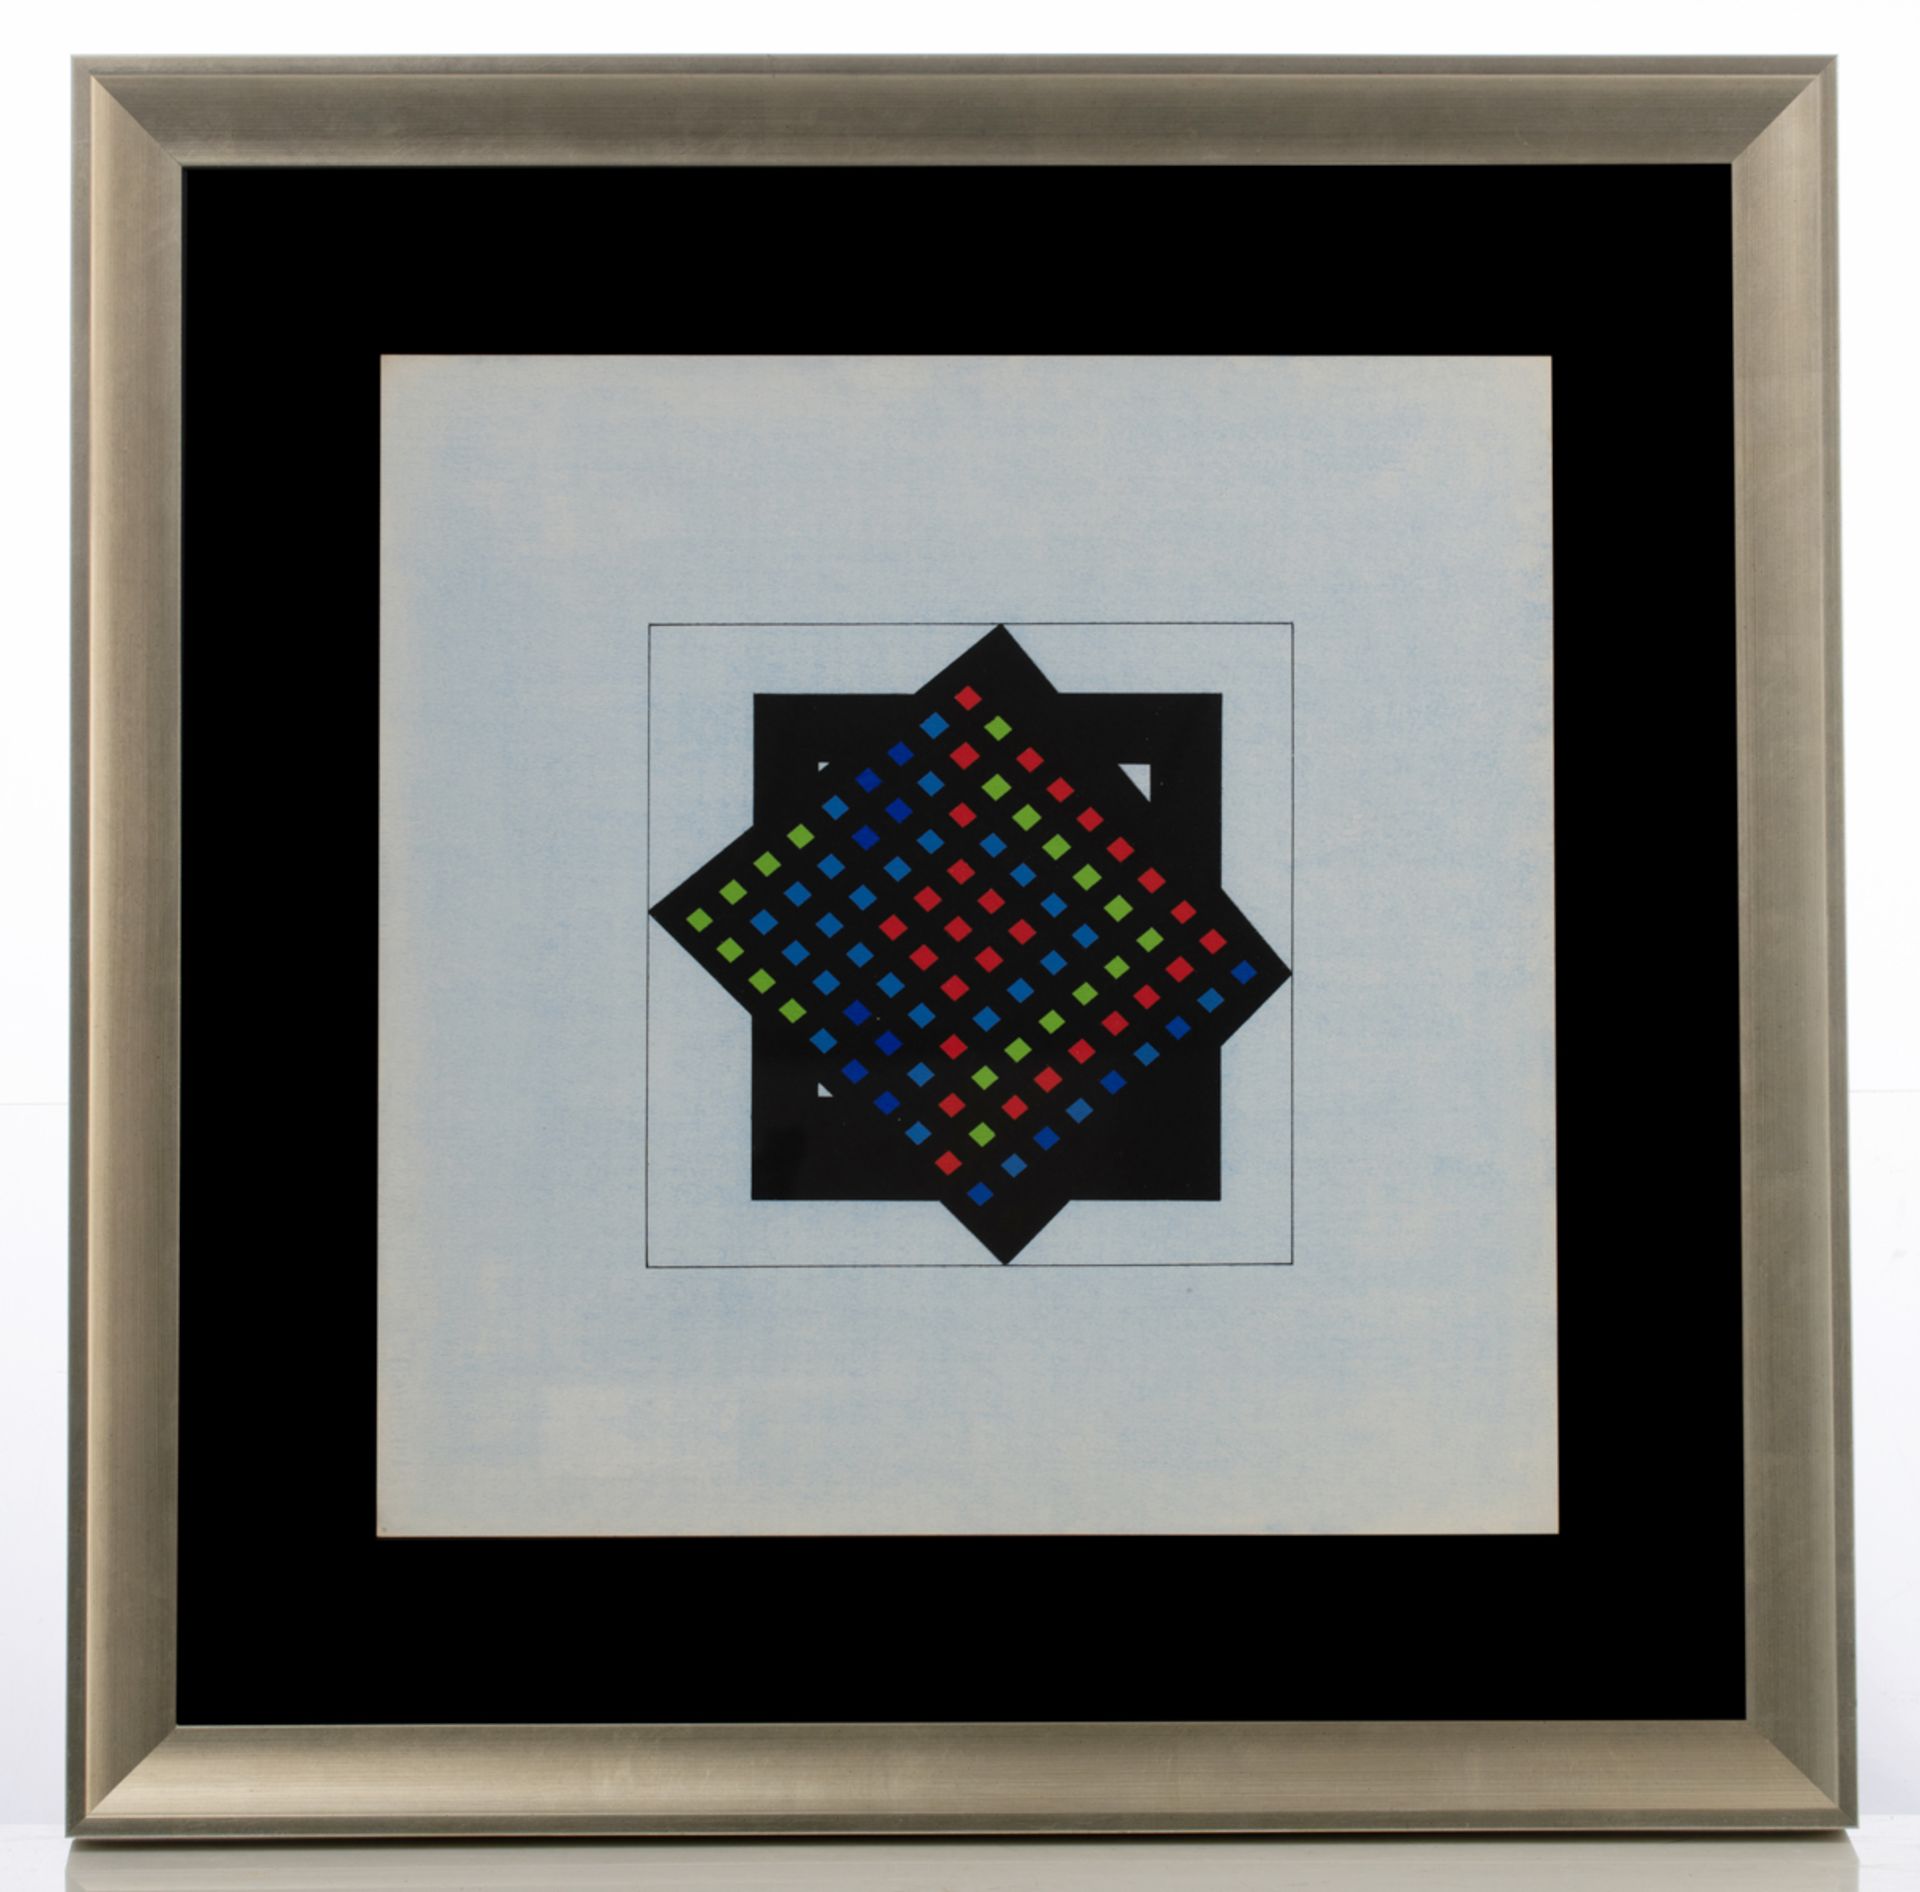 Vandenbranden G., a geometric abstraction, dated (19)69, acrylic and colour pencil on Steinbach pape - Bild 2 aus 5